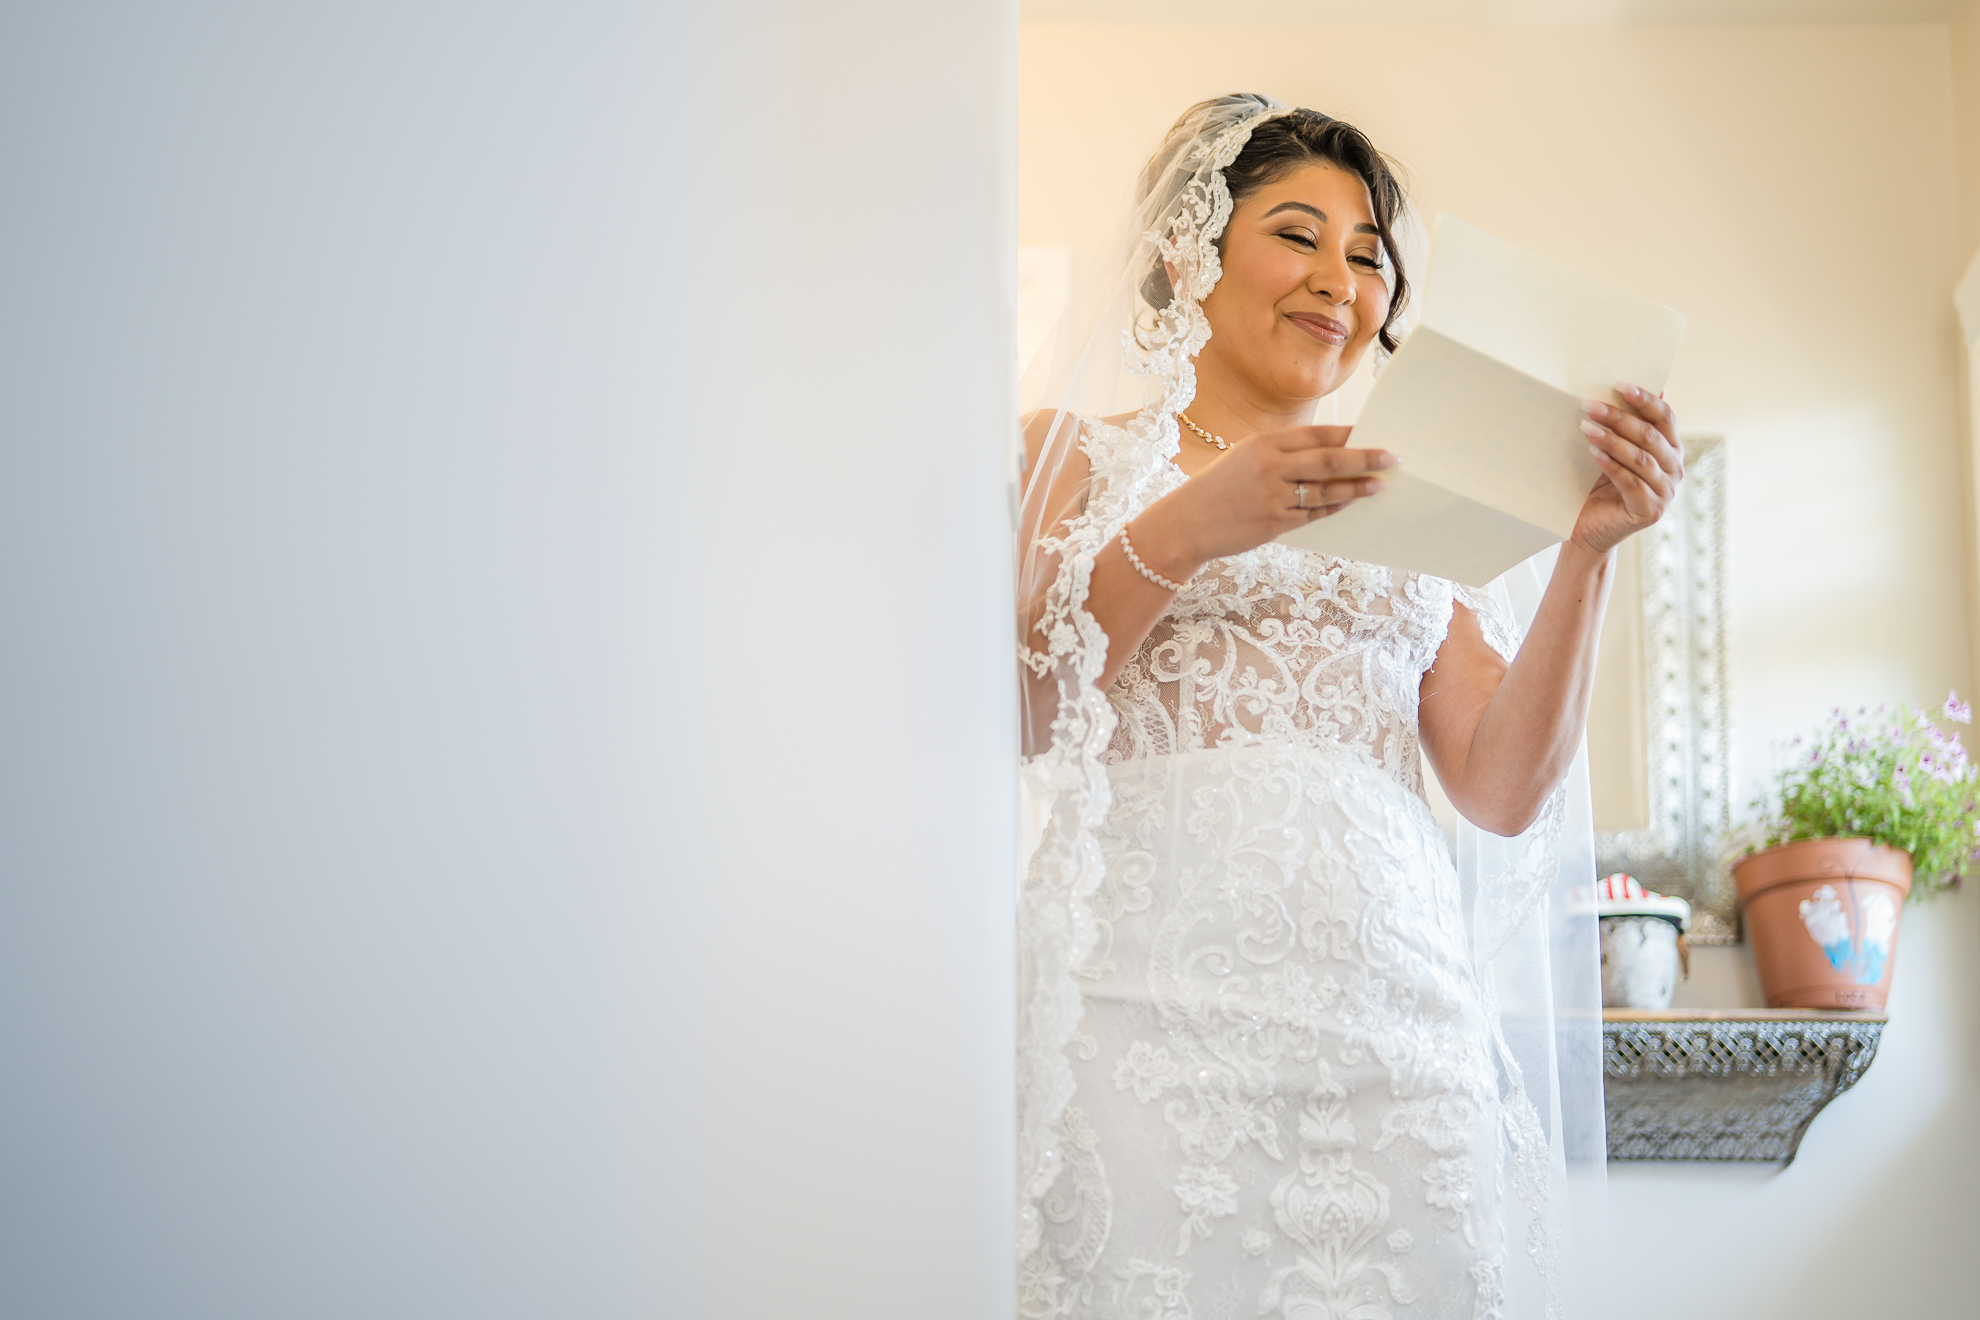 ThomasKim_photography A bride in a wedding dress reading a love letter.